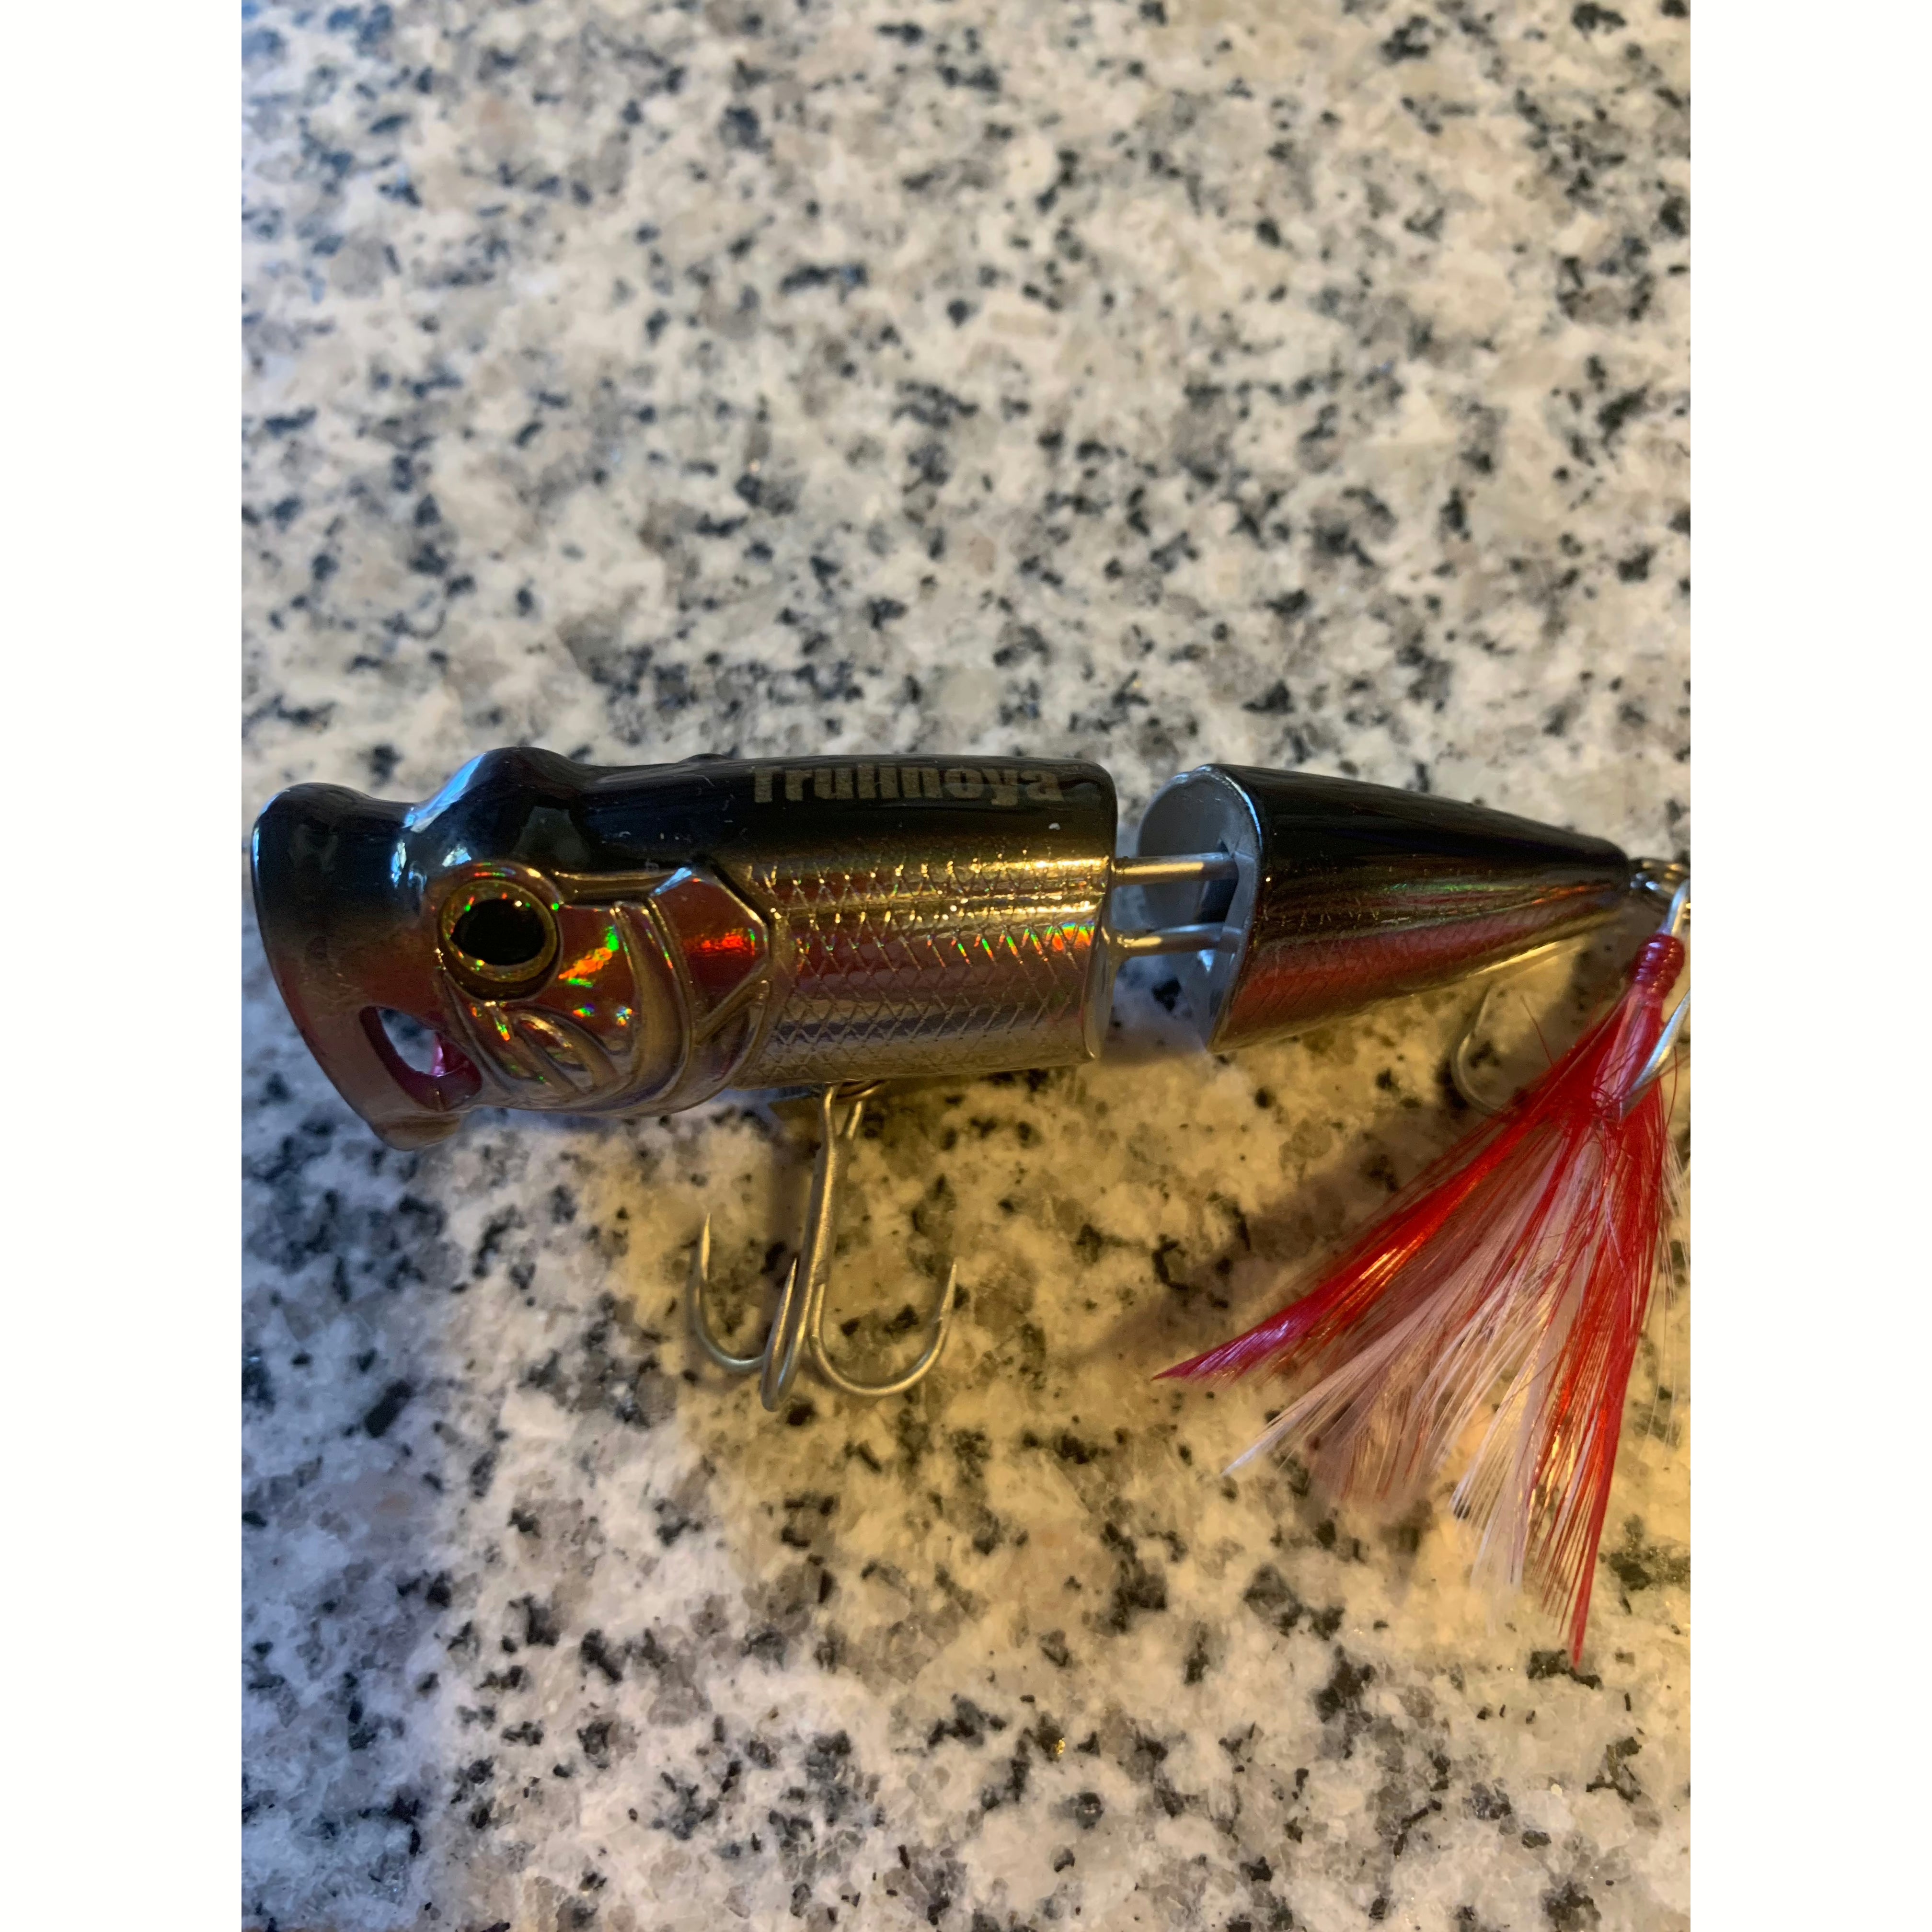 Hard body top water jointed popper 90mm 11g